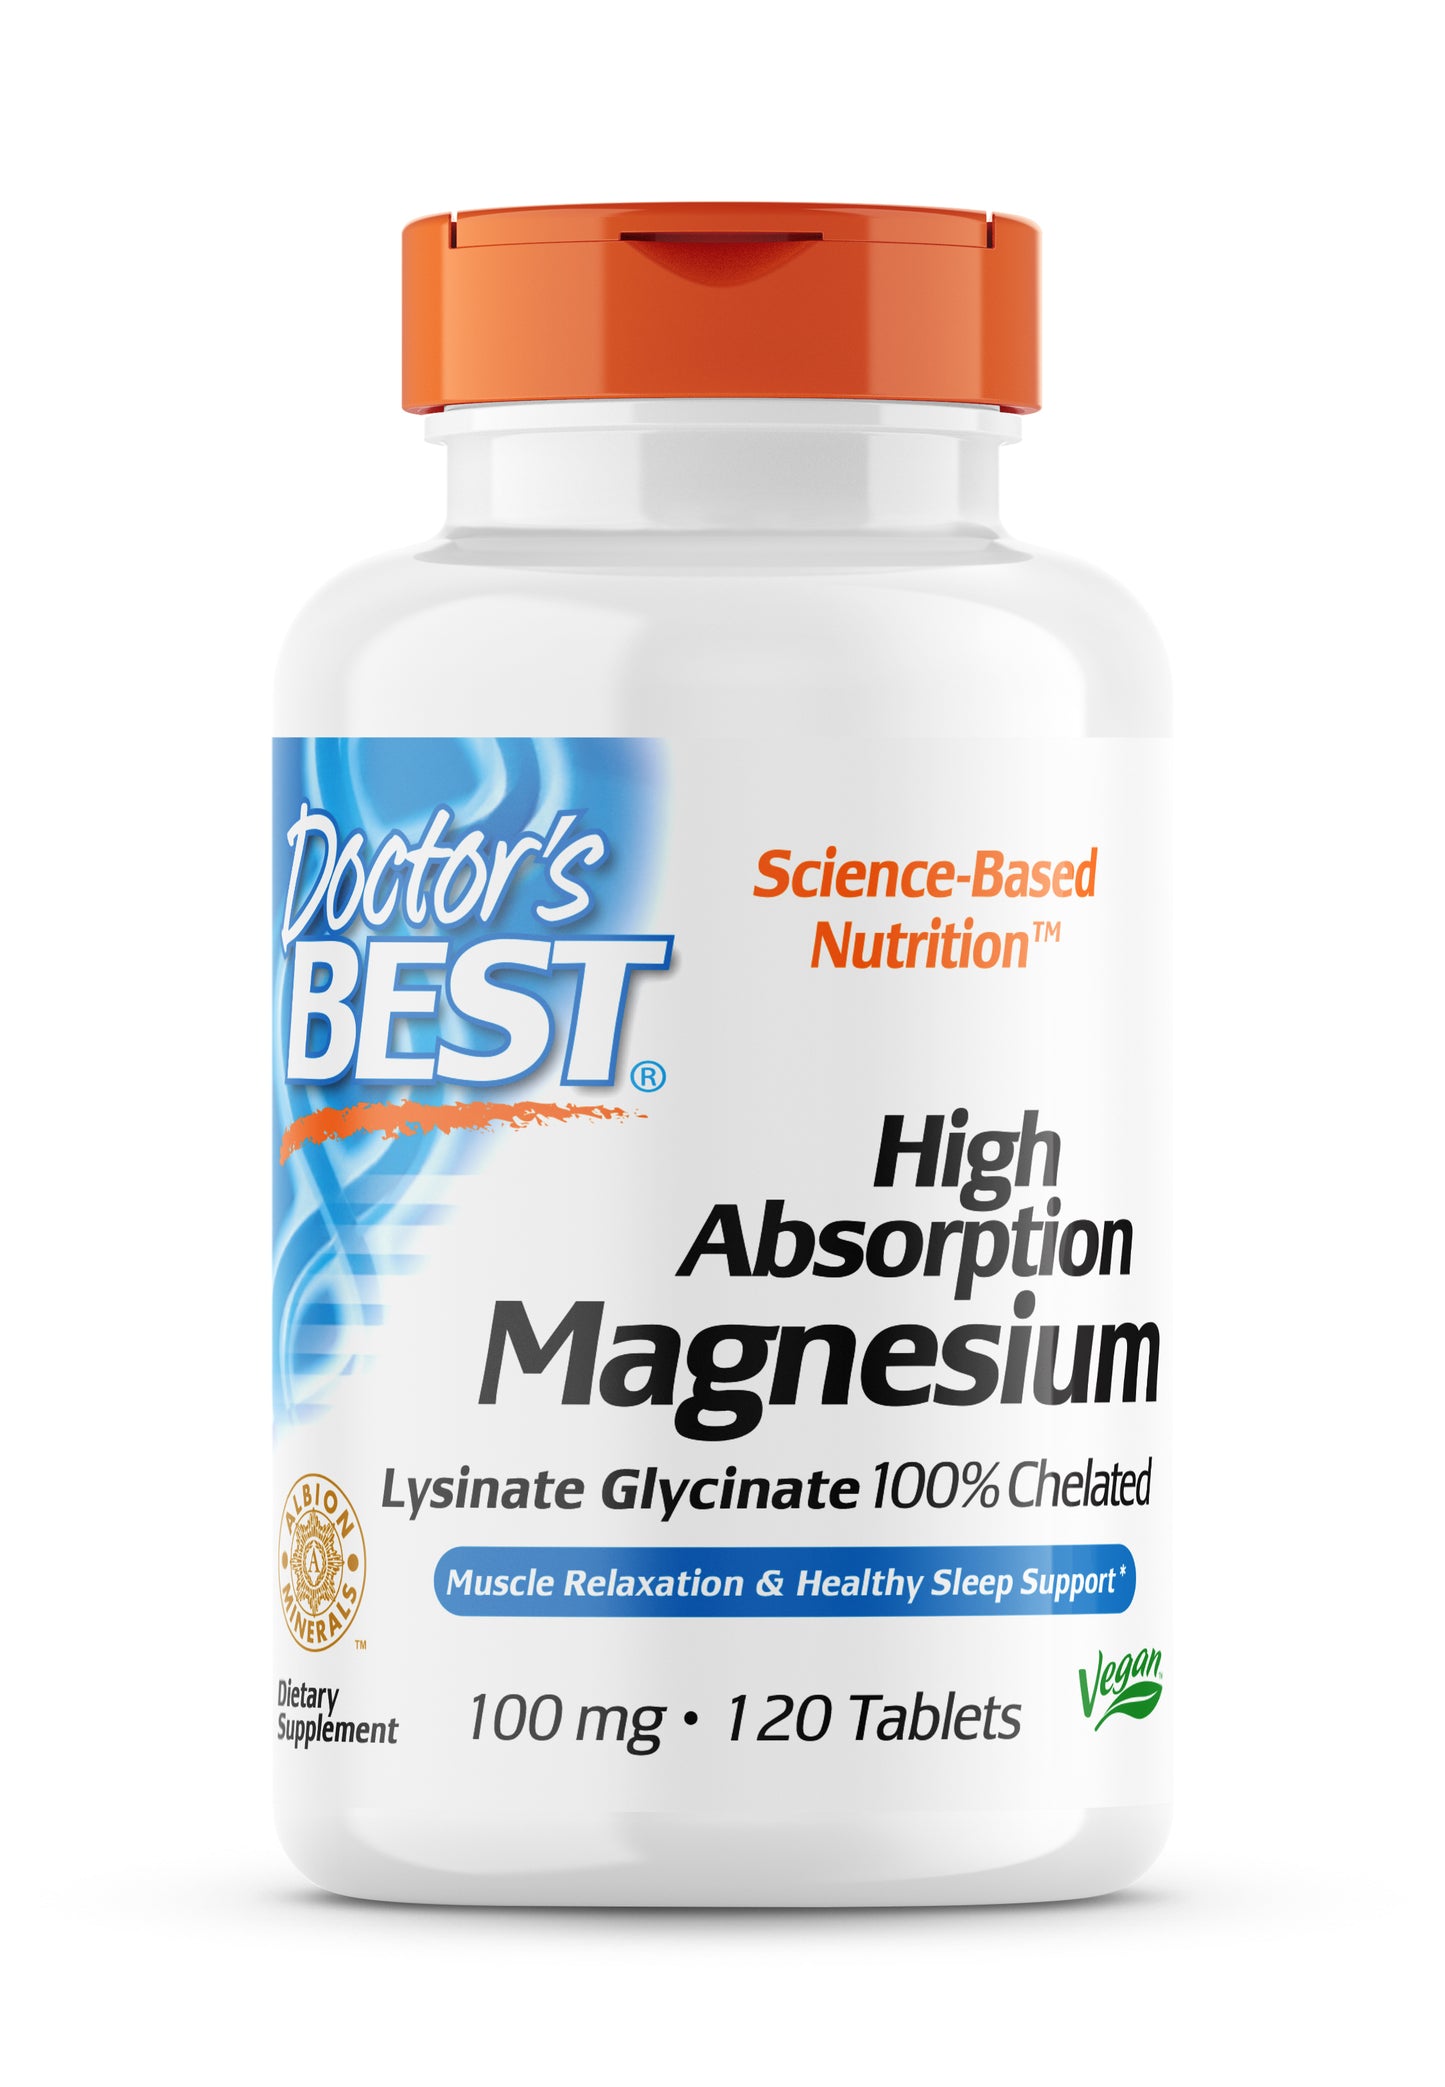 Doctor's Best High Absorption Magnesium 100mg, 120 tabs